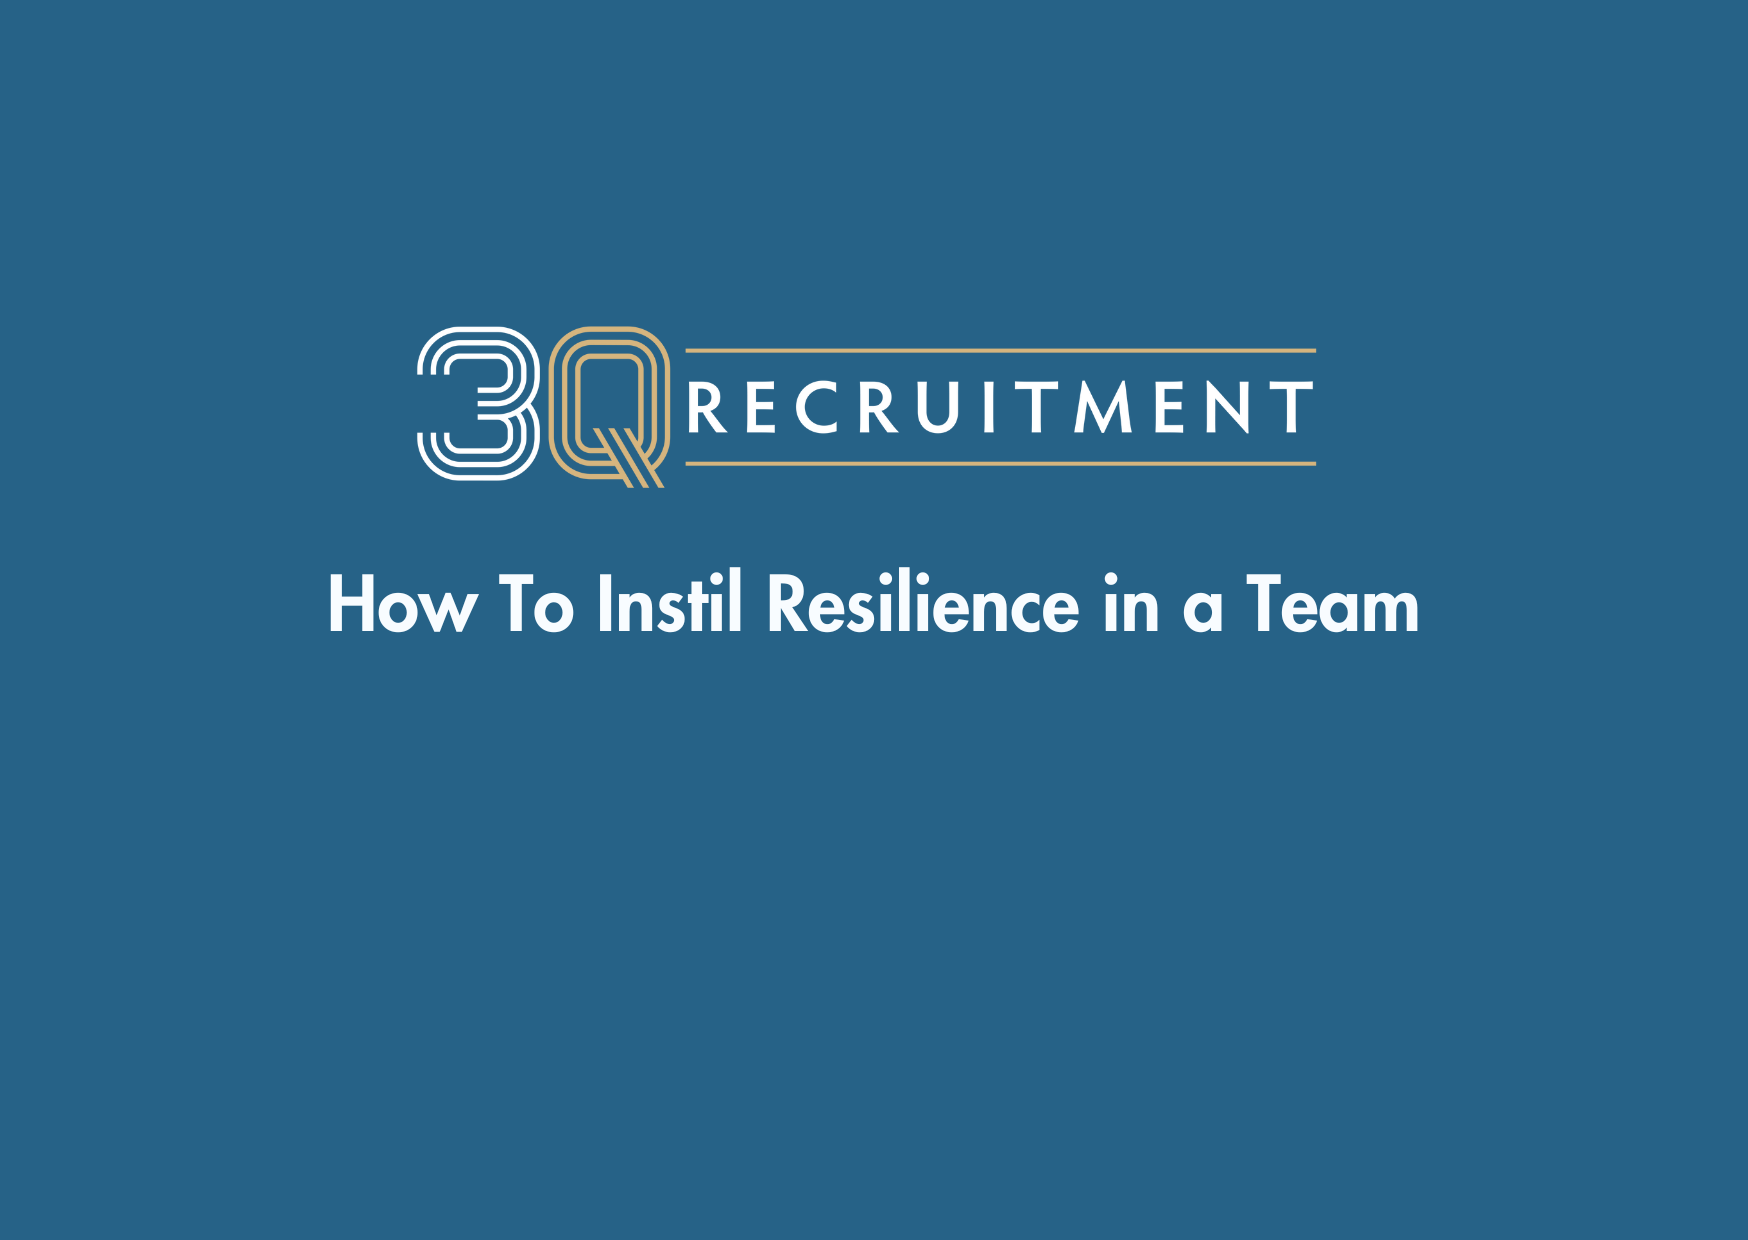 3Q Recruitment How To Instil Resilience in a Team